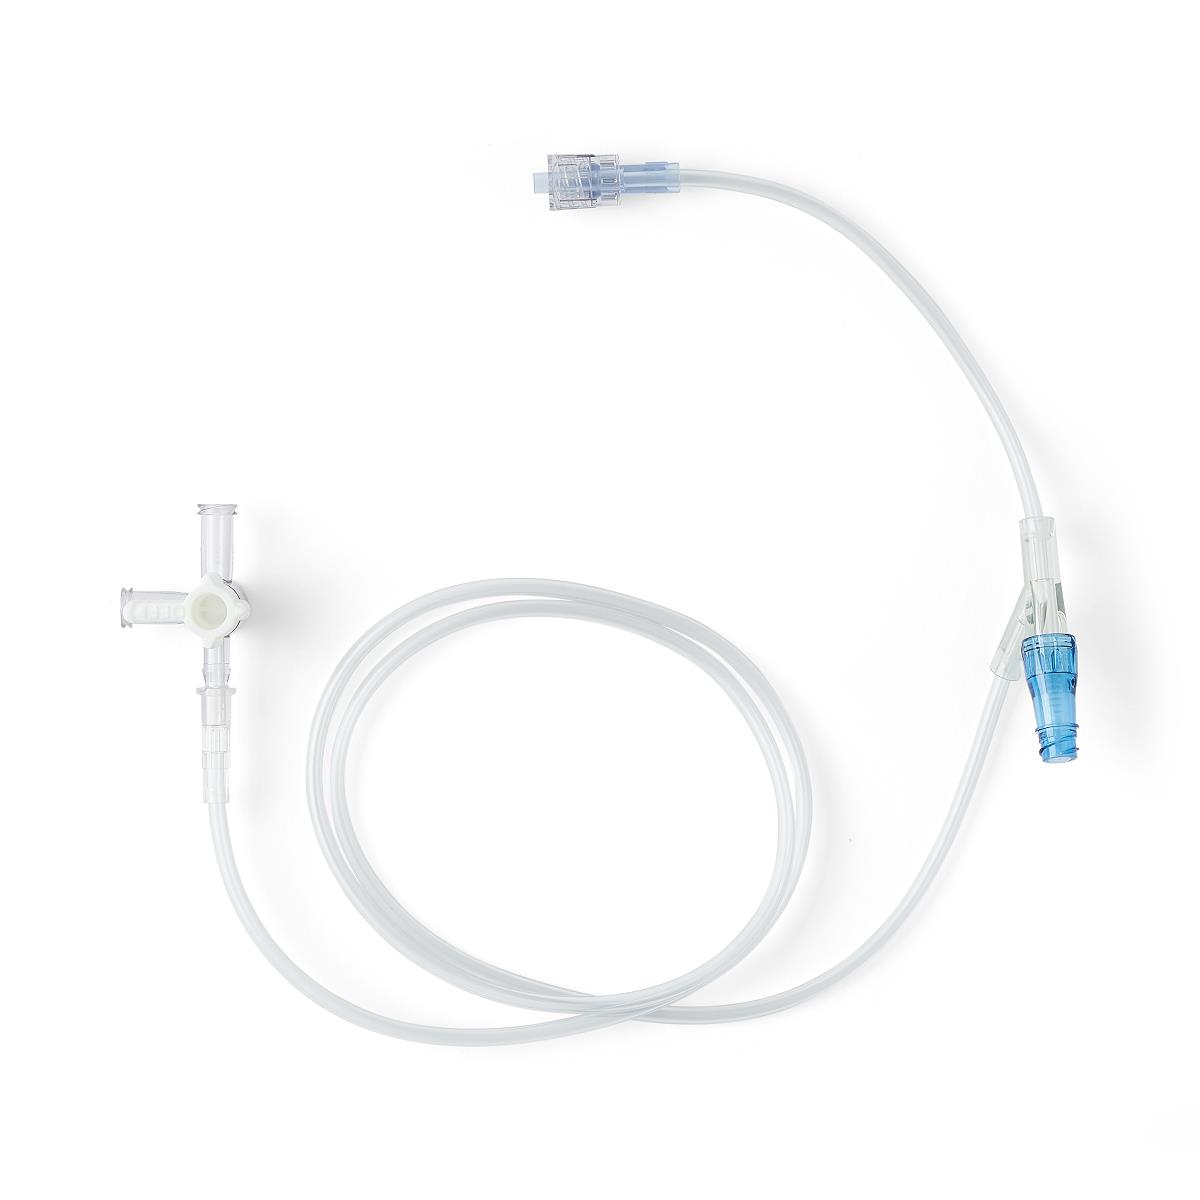 ICU Medical Anesthesia Extension Sets